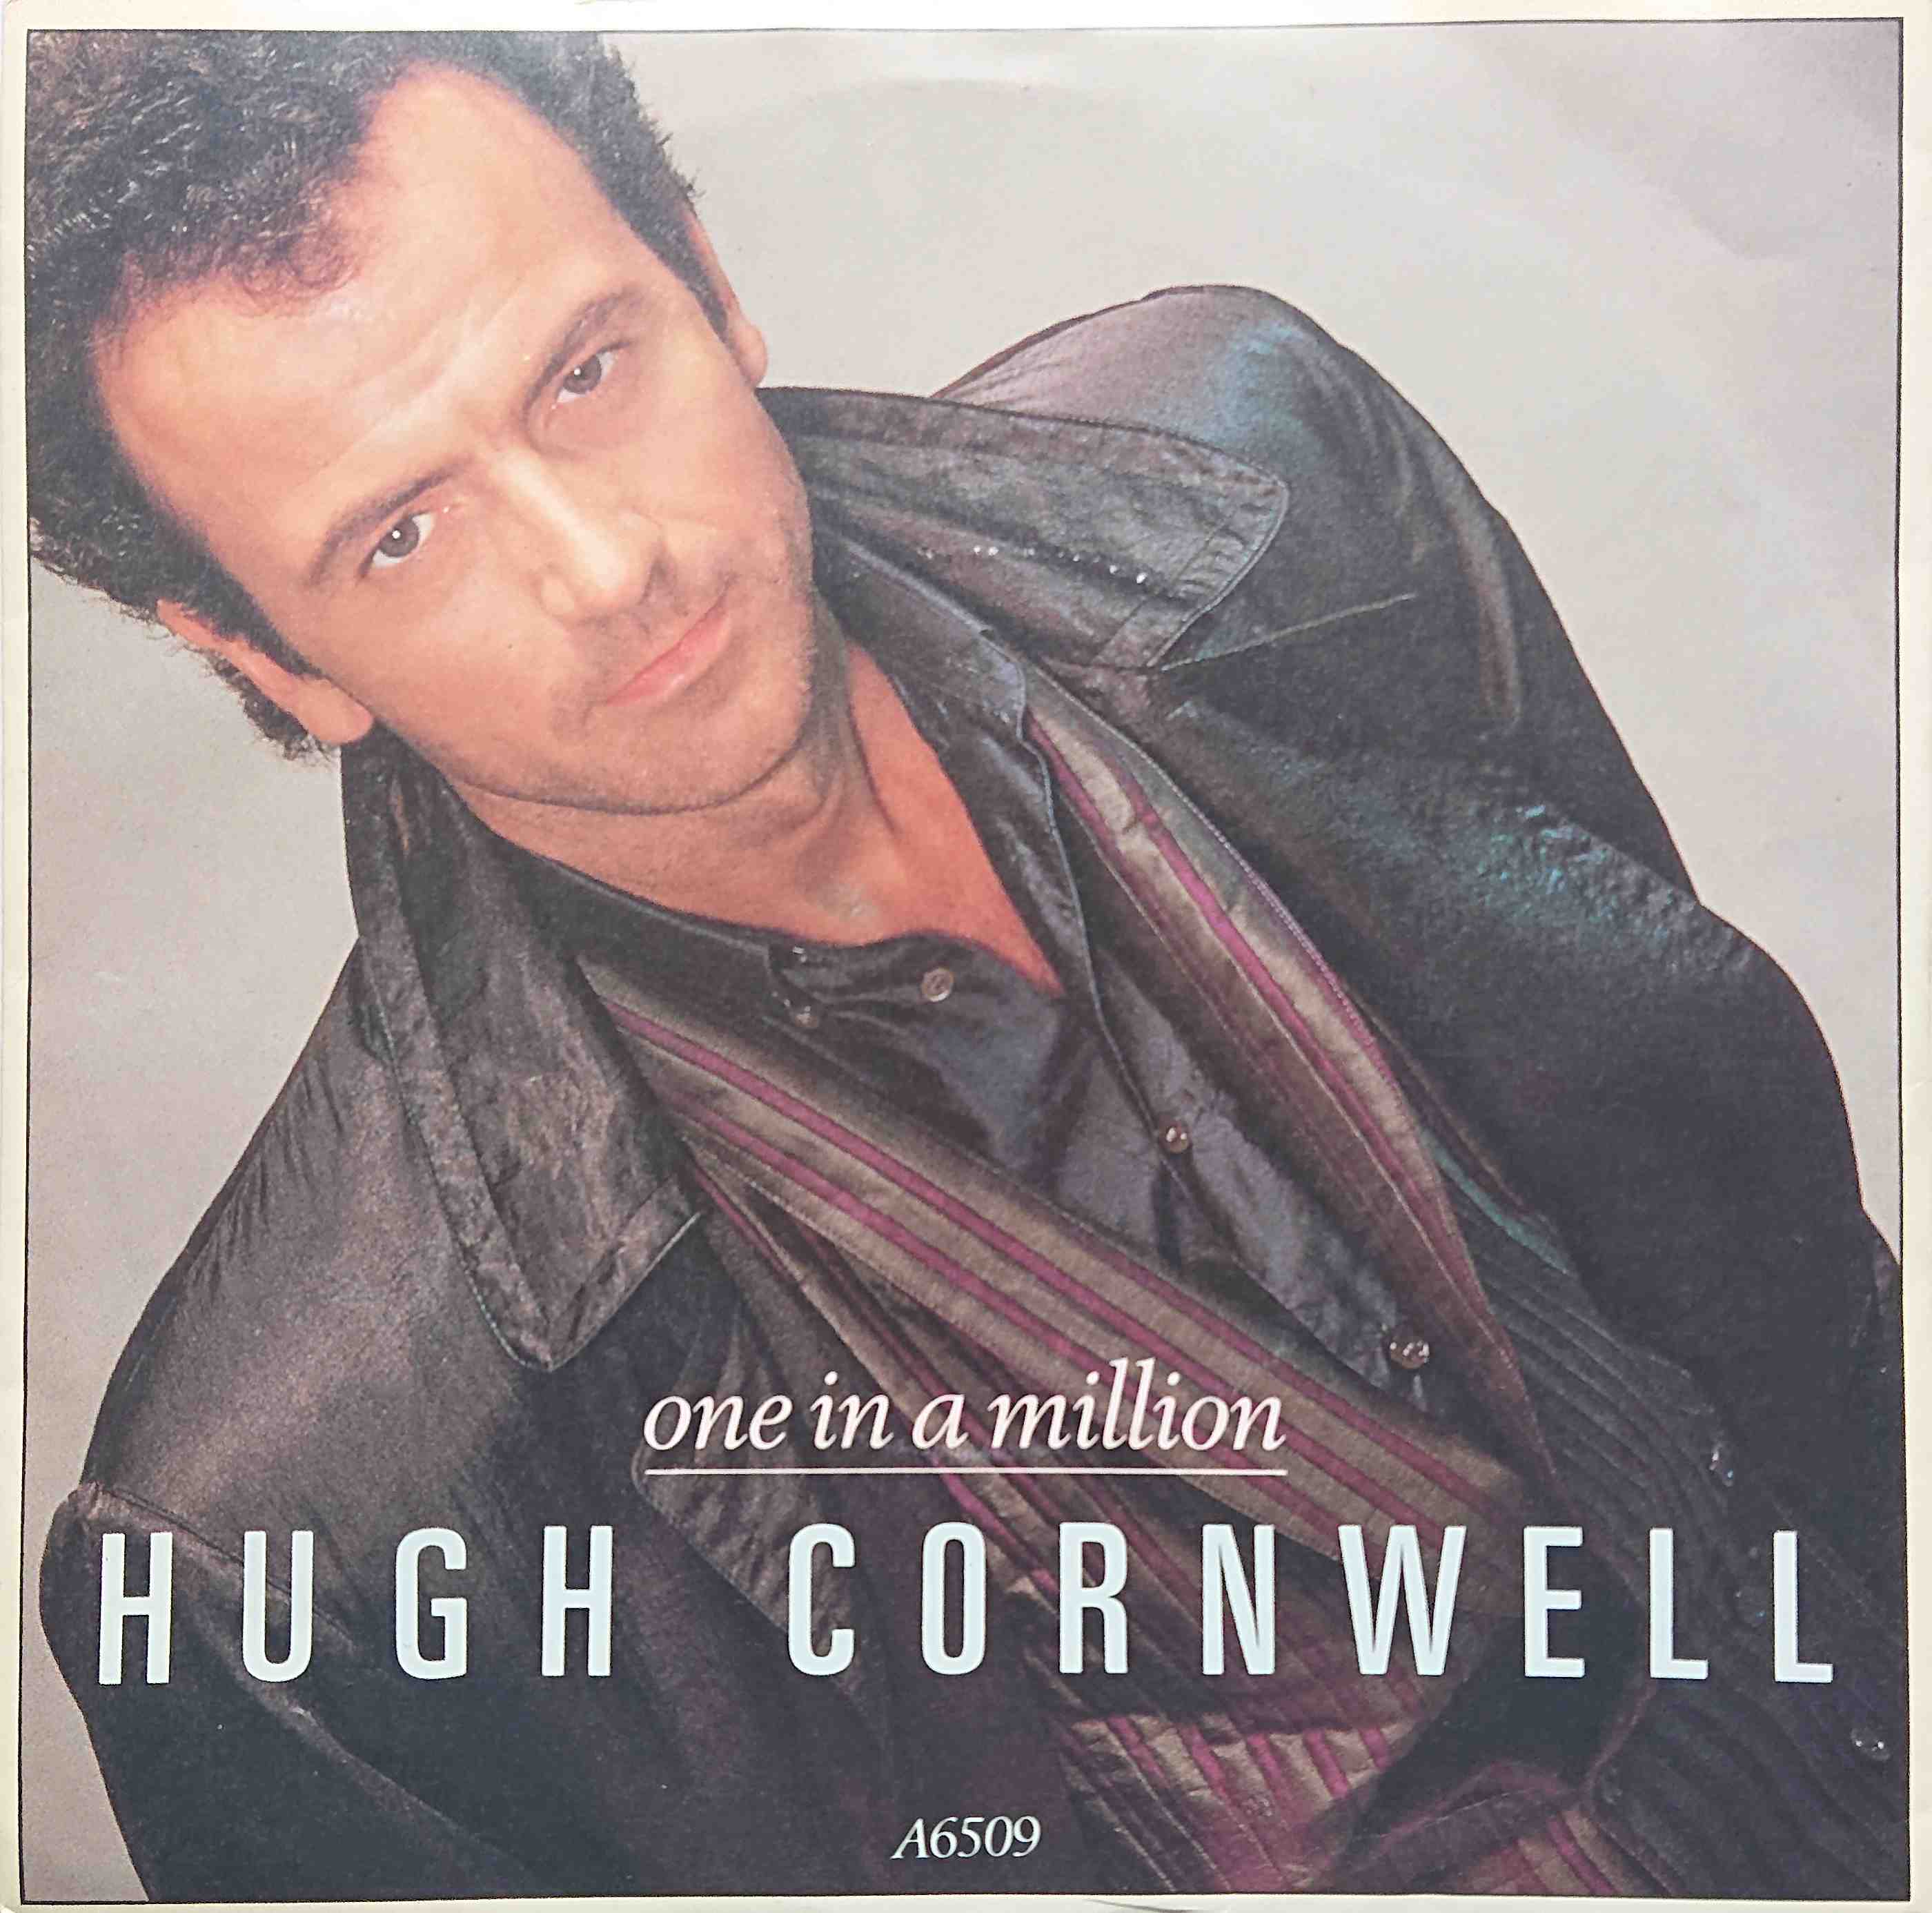 Picture of One in a million by artist Hugh Cornwell from The Stranglers singles